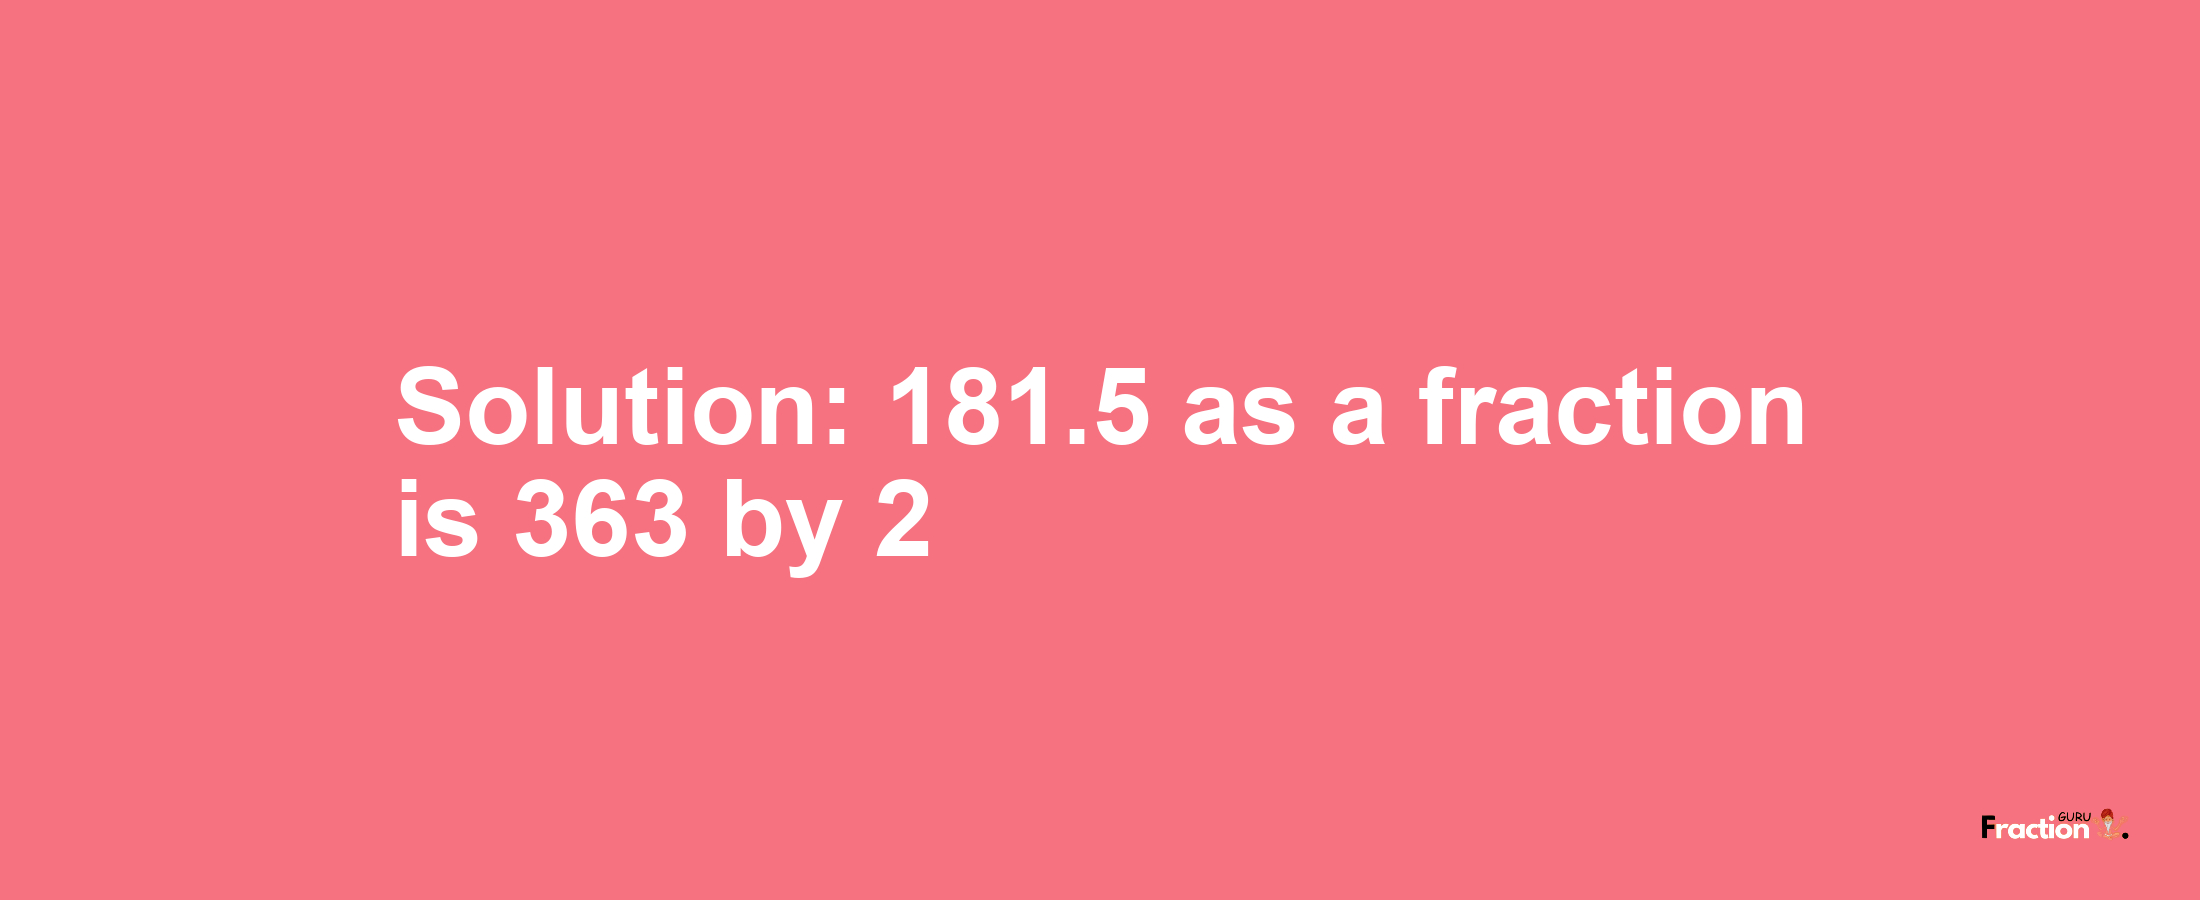 Solution:181.5 as a fraction is 363/2